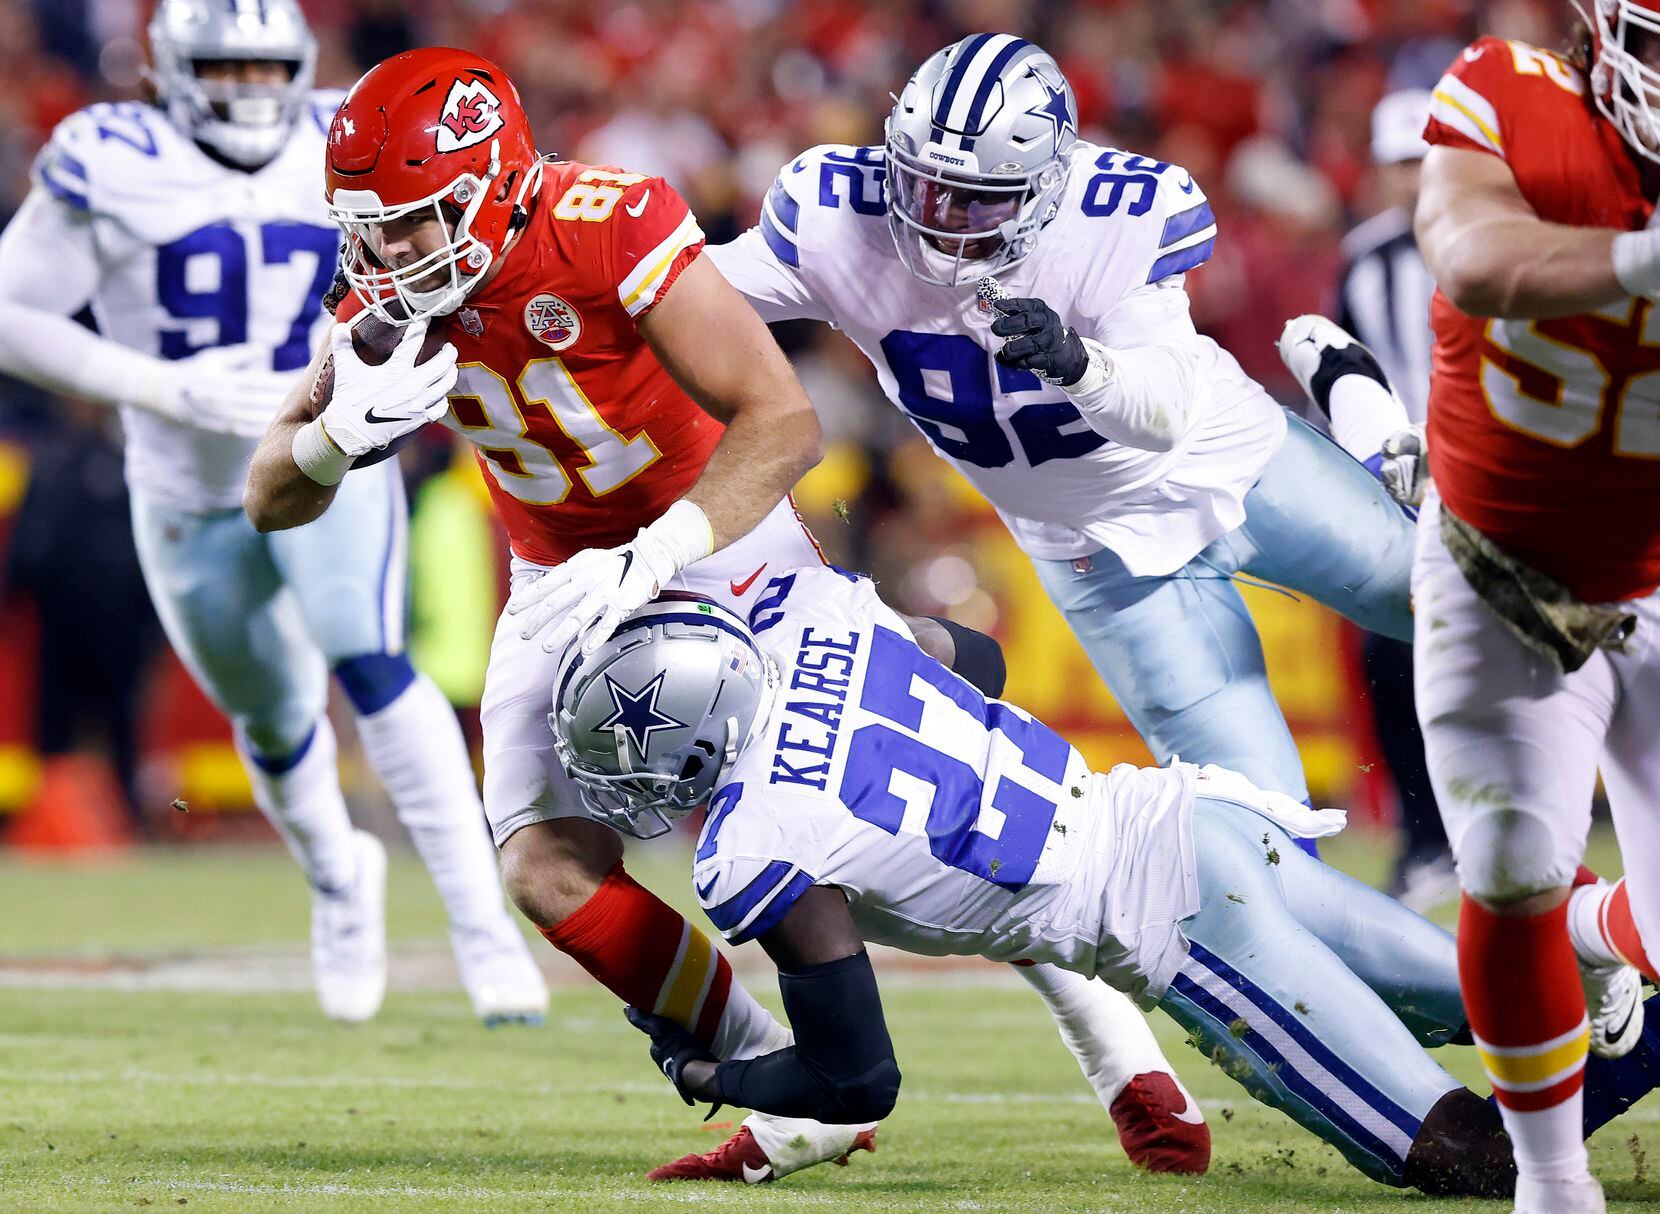 Dallas Cowboys defensive end Dorance Armstrong (92) and safety Jayron Kearse (27) combine for a fourth quarter tackle of Kansas City Chiefs tight end Blake Bell (81) at Arrowhead Stadium in Kansas City, Missouri, November 21, 2021. The Cowboys lost, 19-9. (Tom Fox/The Dallas Morning News)